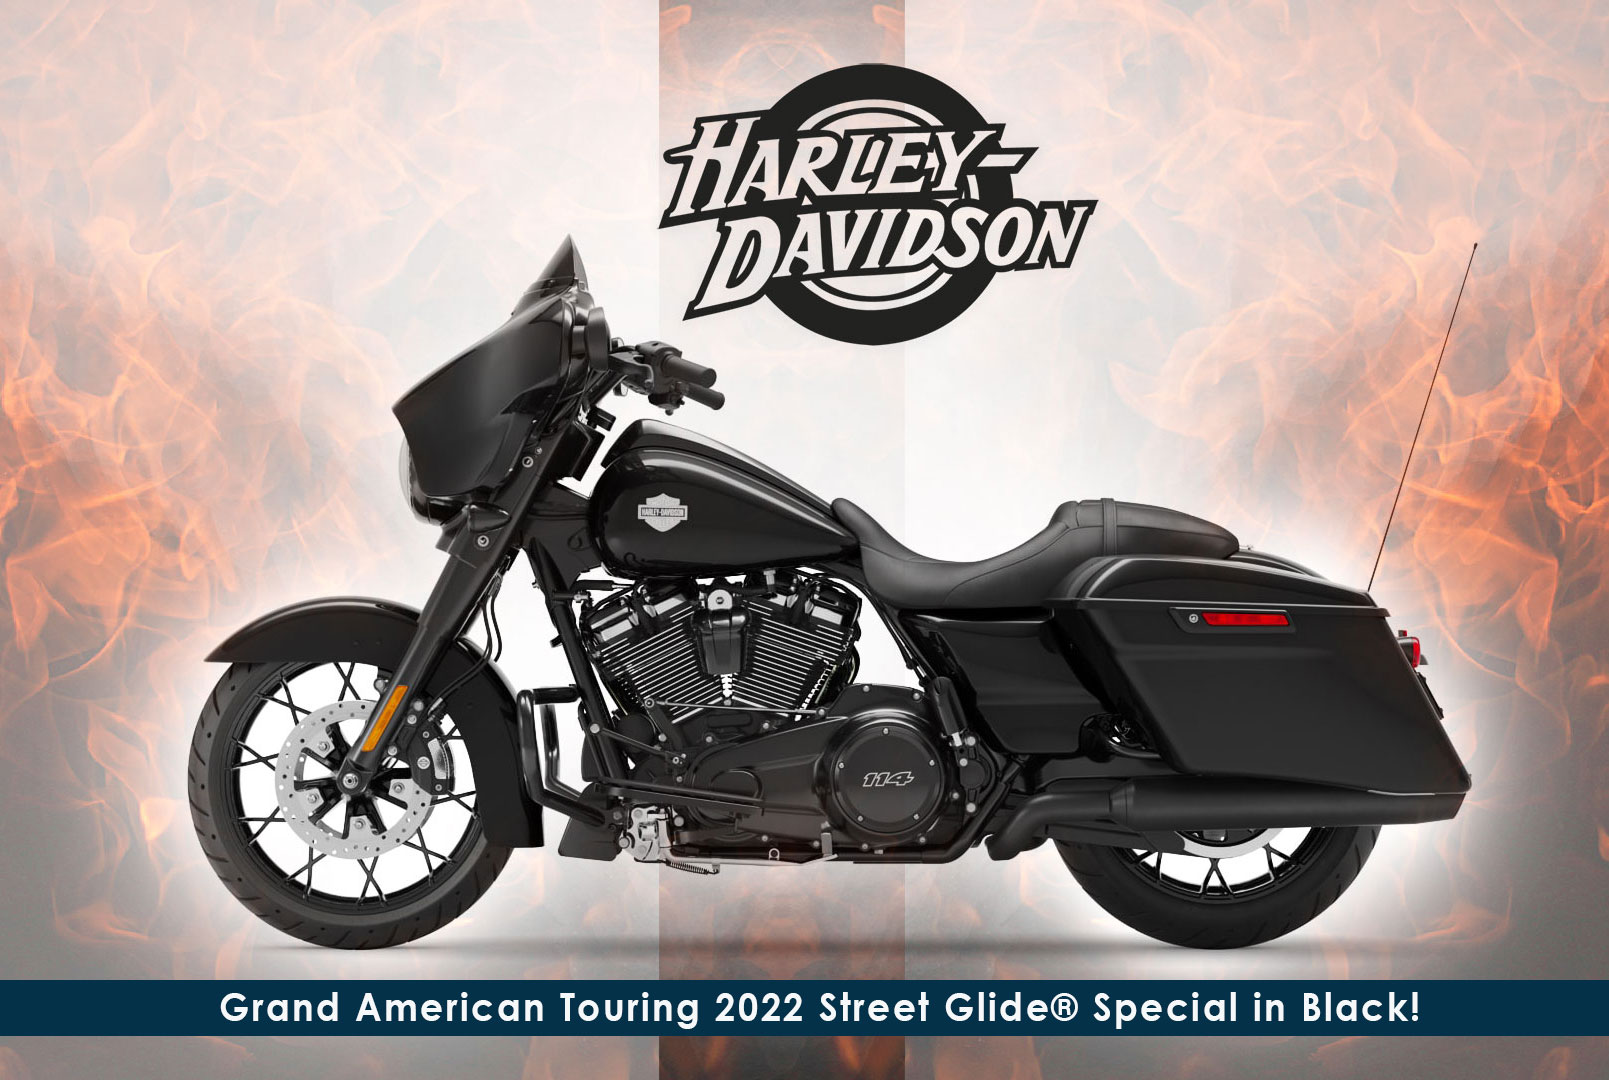 Donate Now to Help LEOs and Enter the LEORF Harley Davidson Raffle 2022!